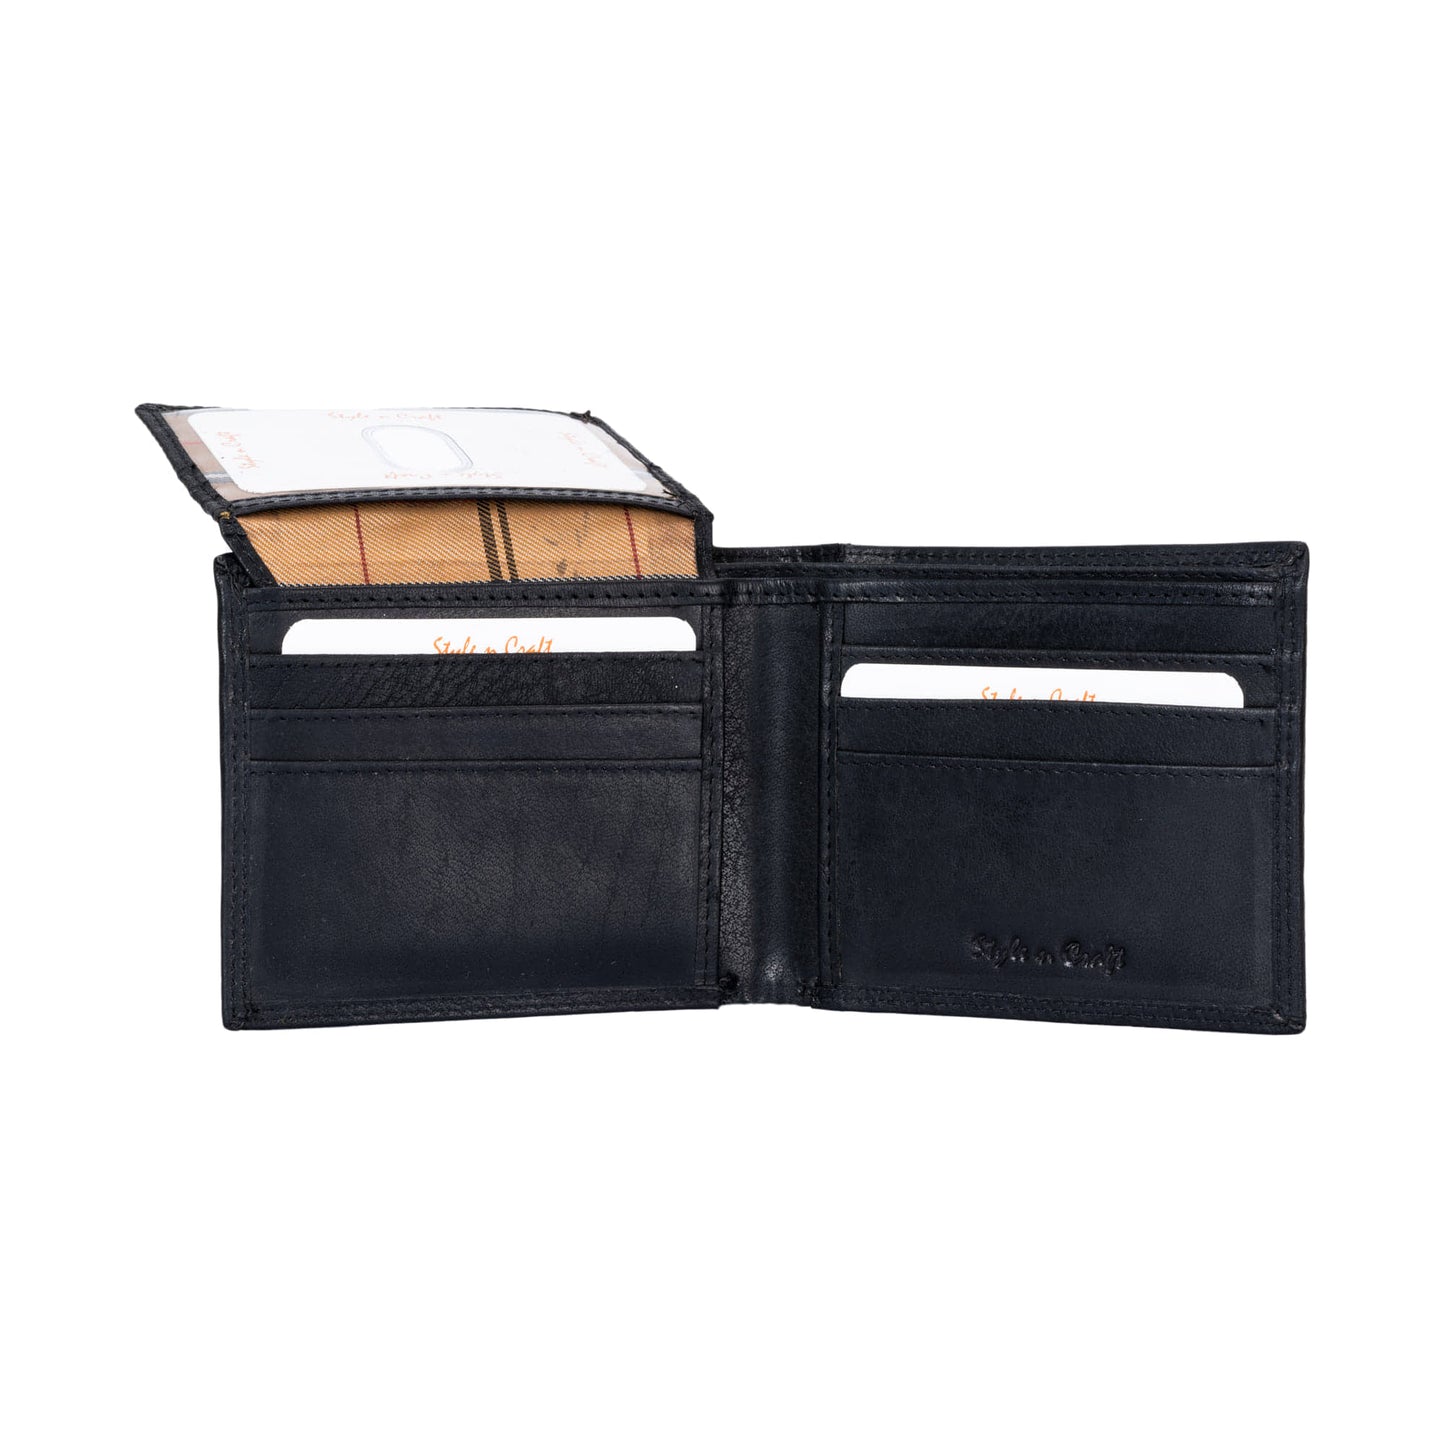 Style n Craft 300796-BL Bi-Fold Pass Case Wallet with Flap in Full Grain Leather - black color - open view 2 showing the open flap with ID window and 3 credit card pockets below